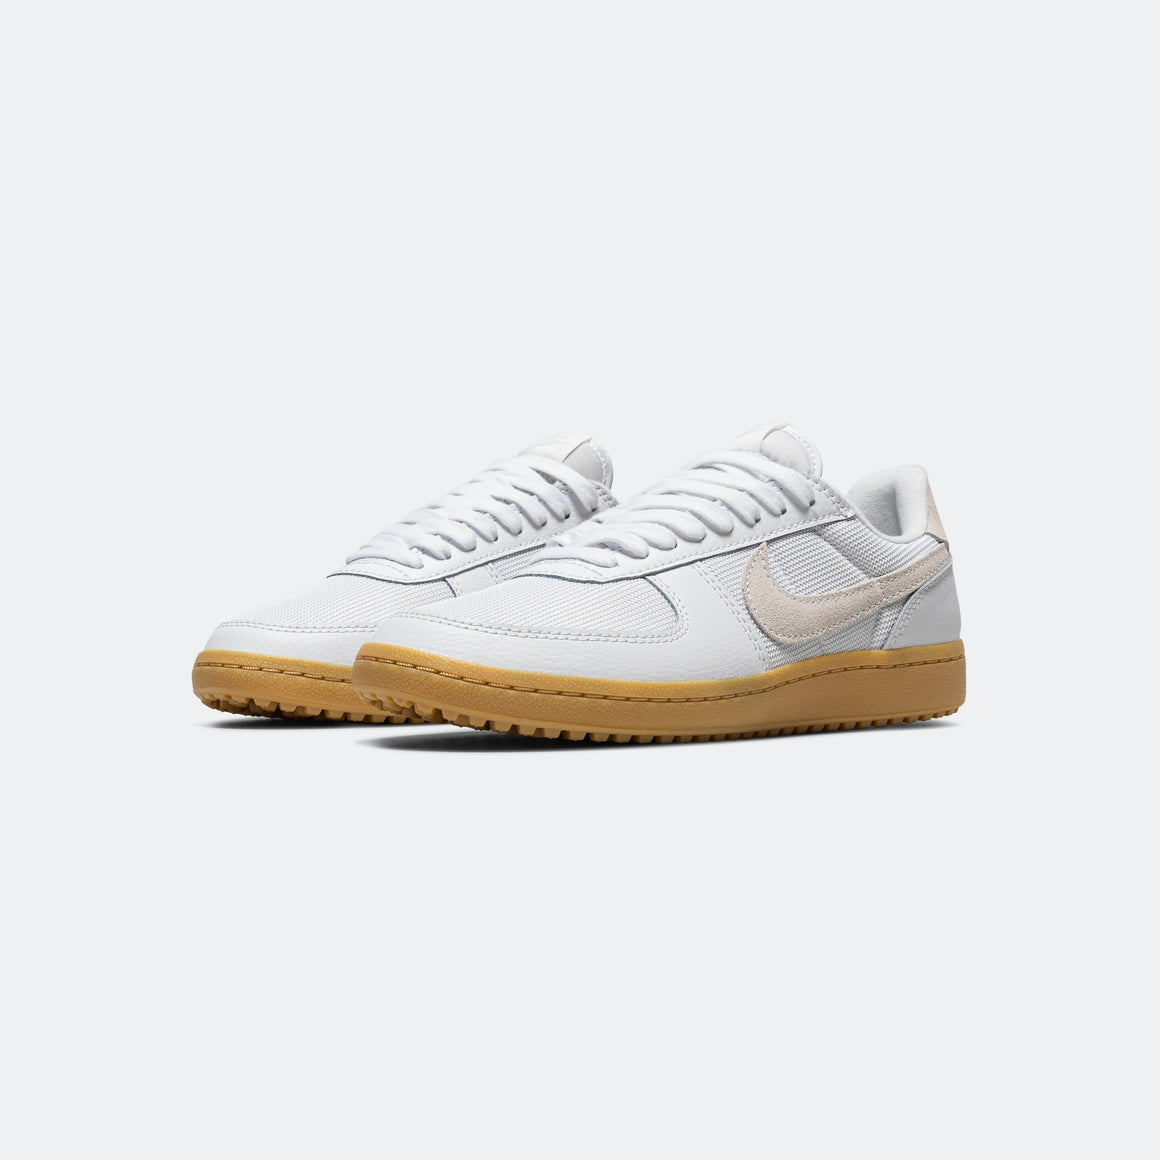 Nike - Field General 82 - White/Gum - UP THERE